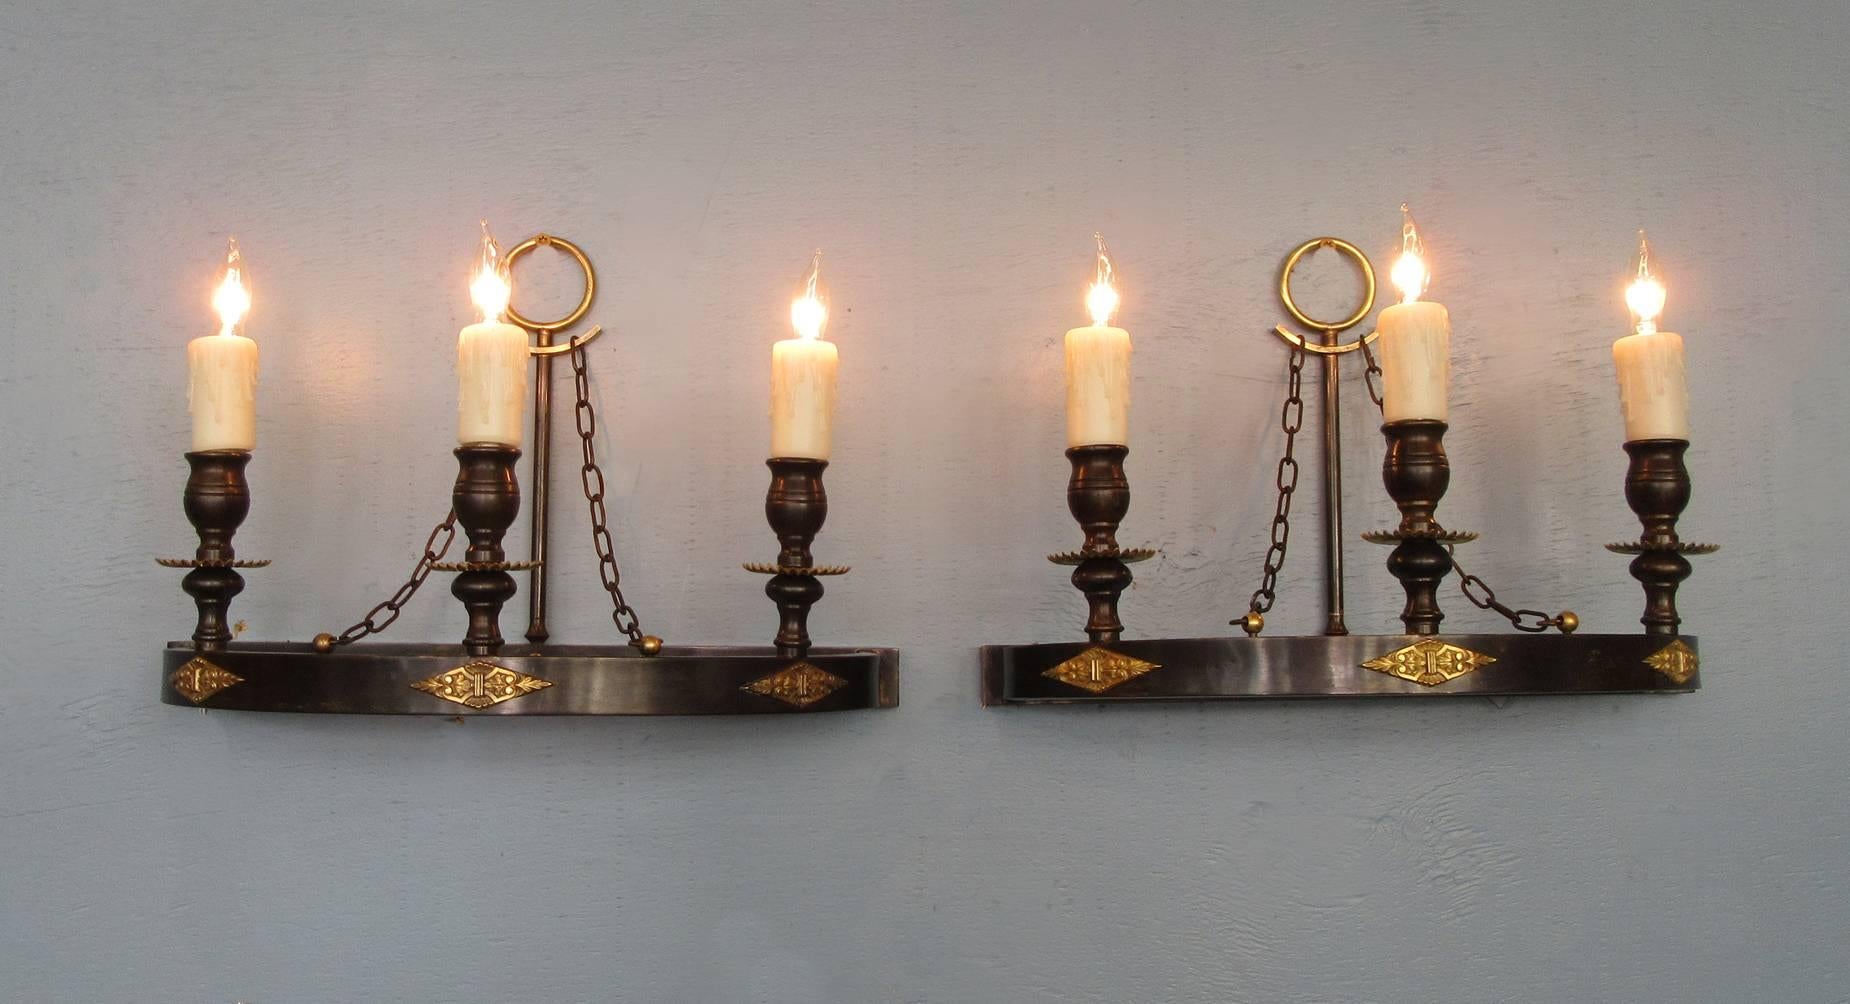 An early 20th century pair of Italian Empire sconces, circa 1920, with patinated bronze demilune shape bases featuring three candle bulbs and brass applique. The sconces have been rewired with new porcelain sockets.